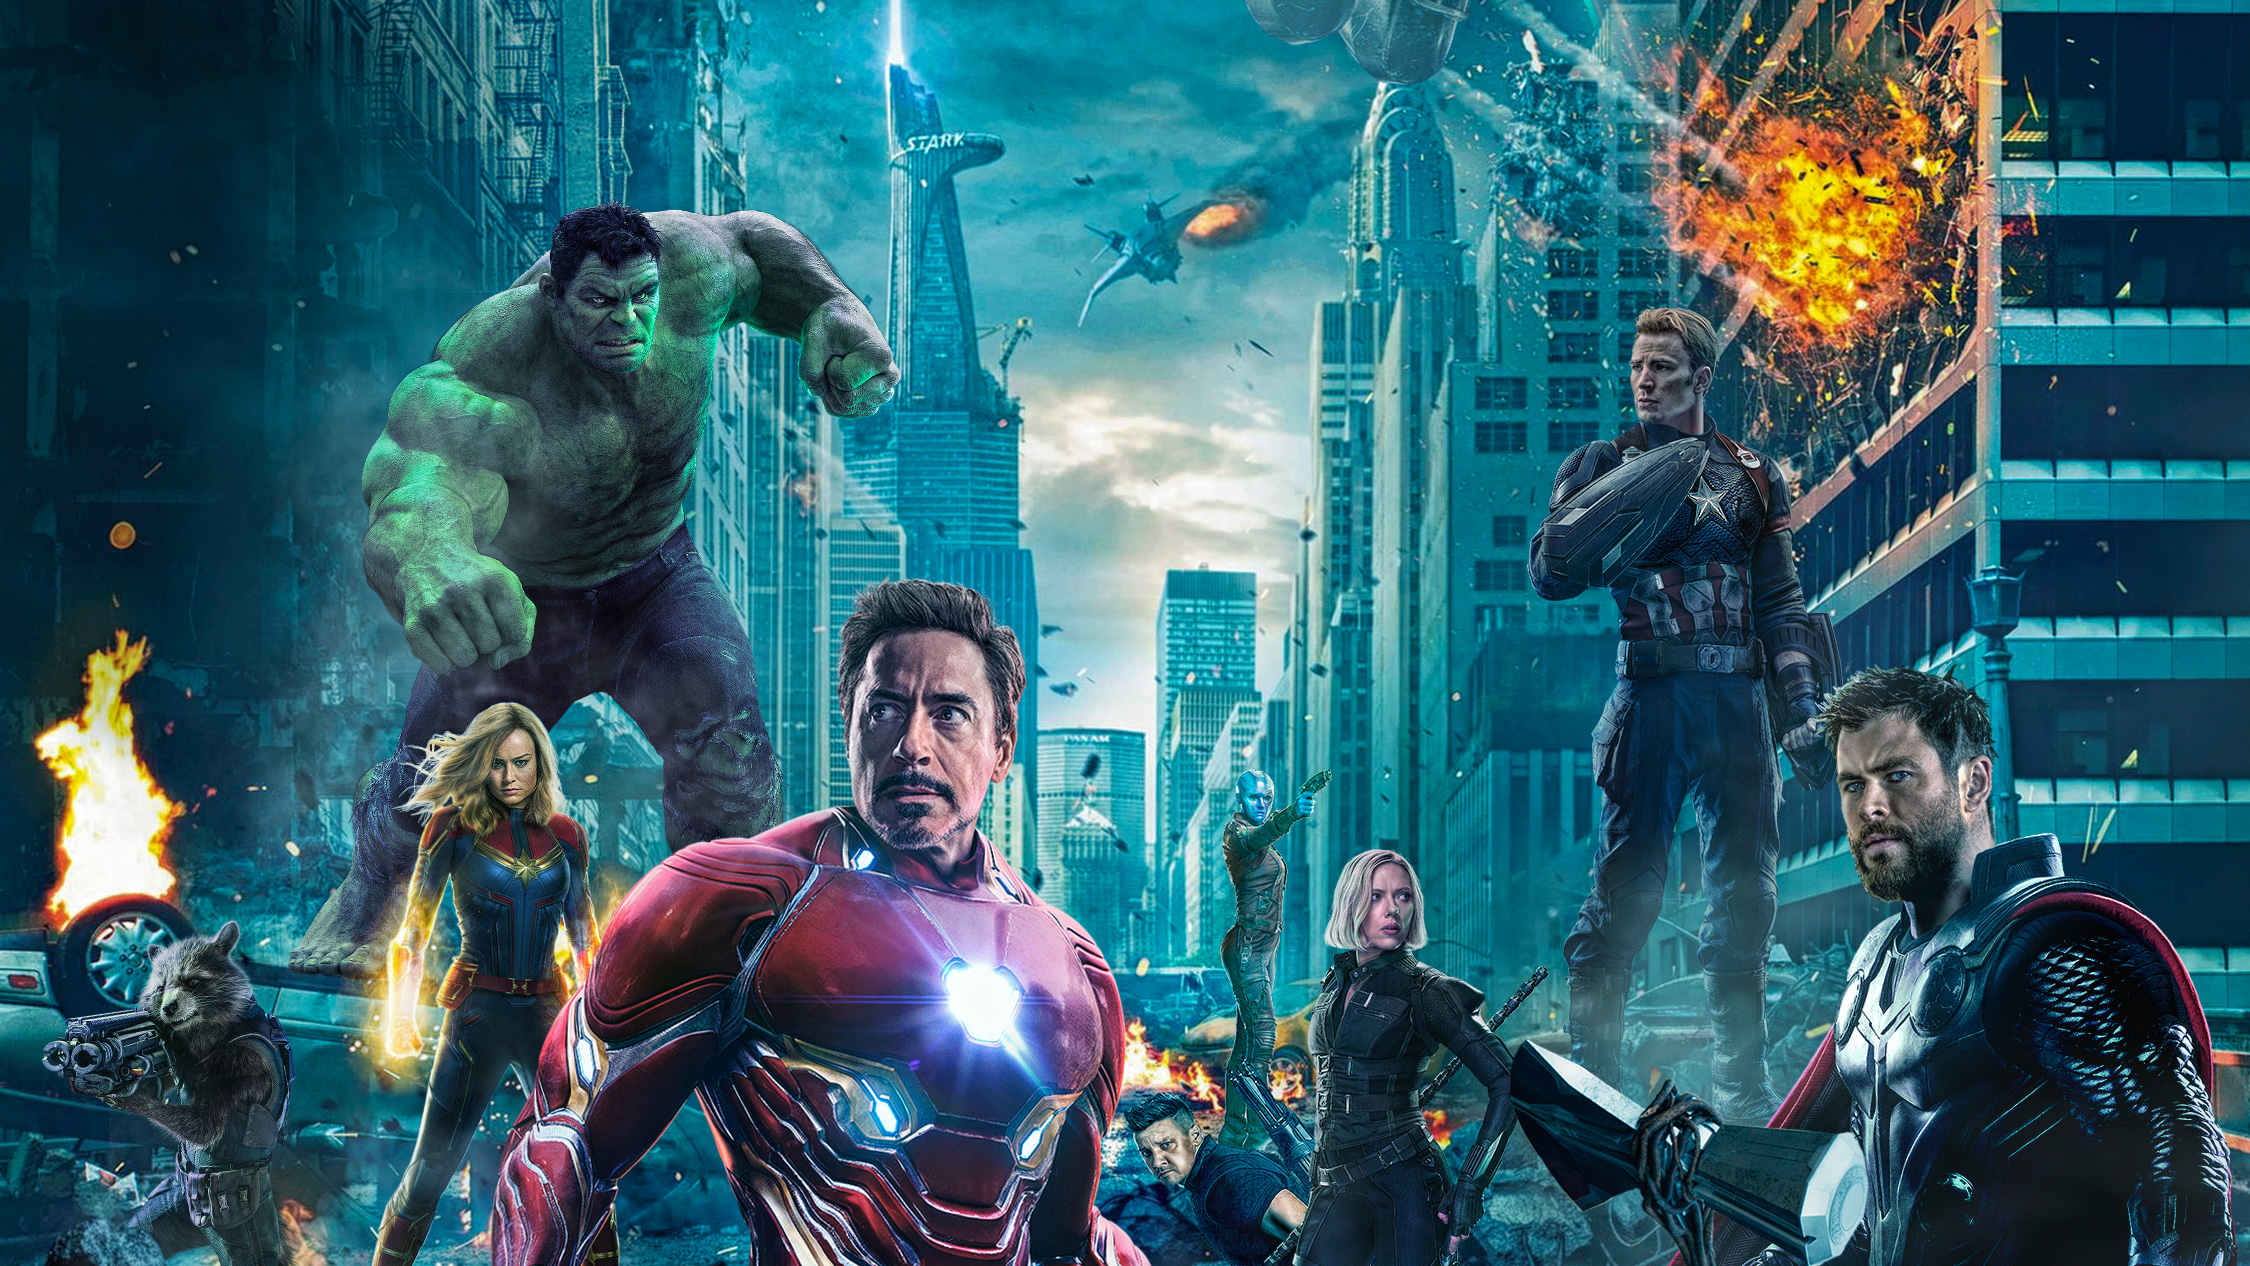 #avengers #movies, movies, #hd, #poster, #iron man